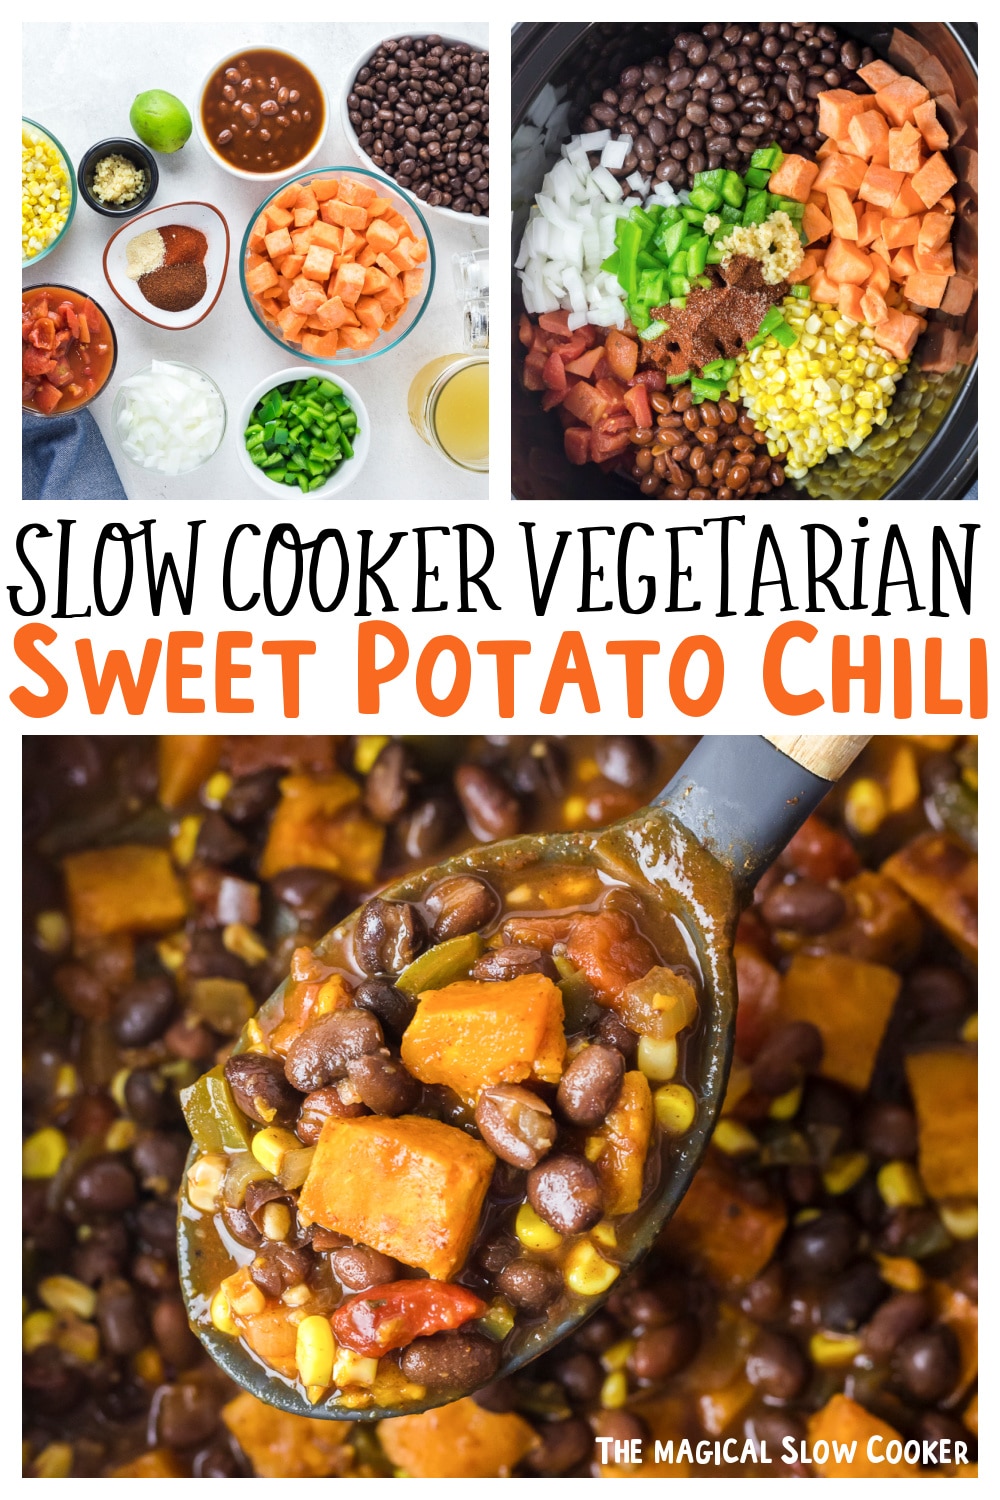 Slow Cooker Vegetarian Sweet Potato Chili - The Magical Slow Cooker